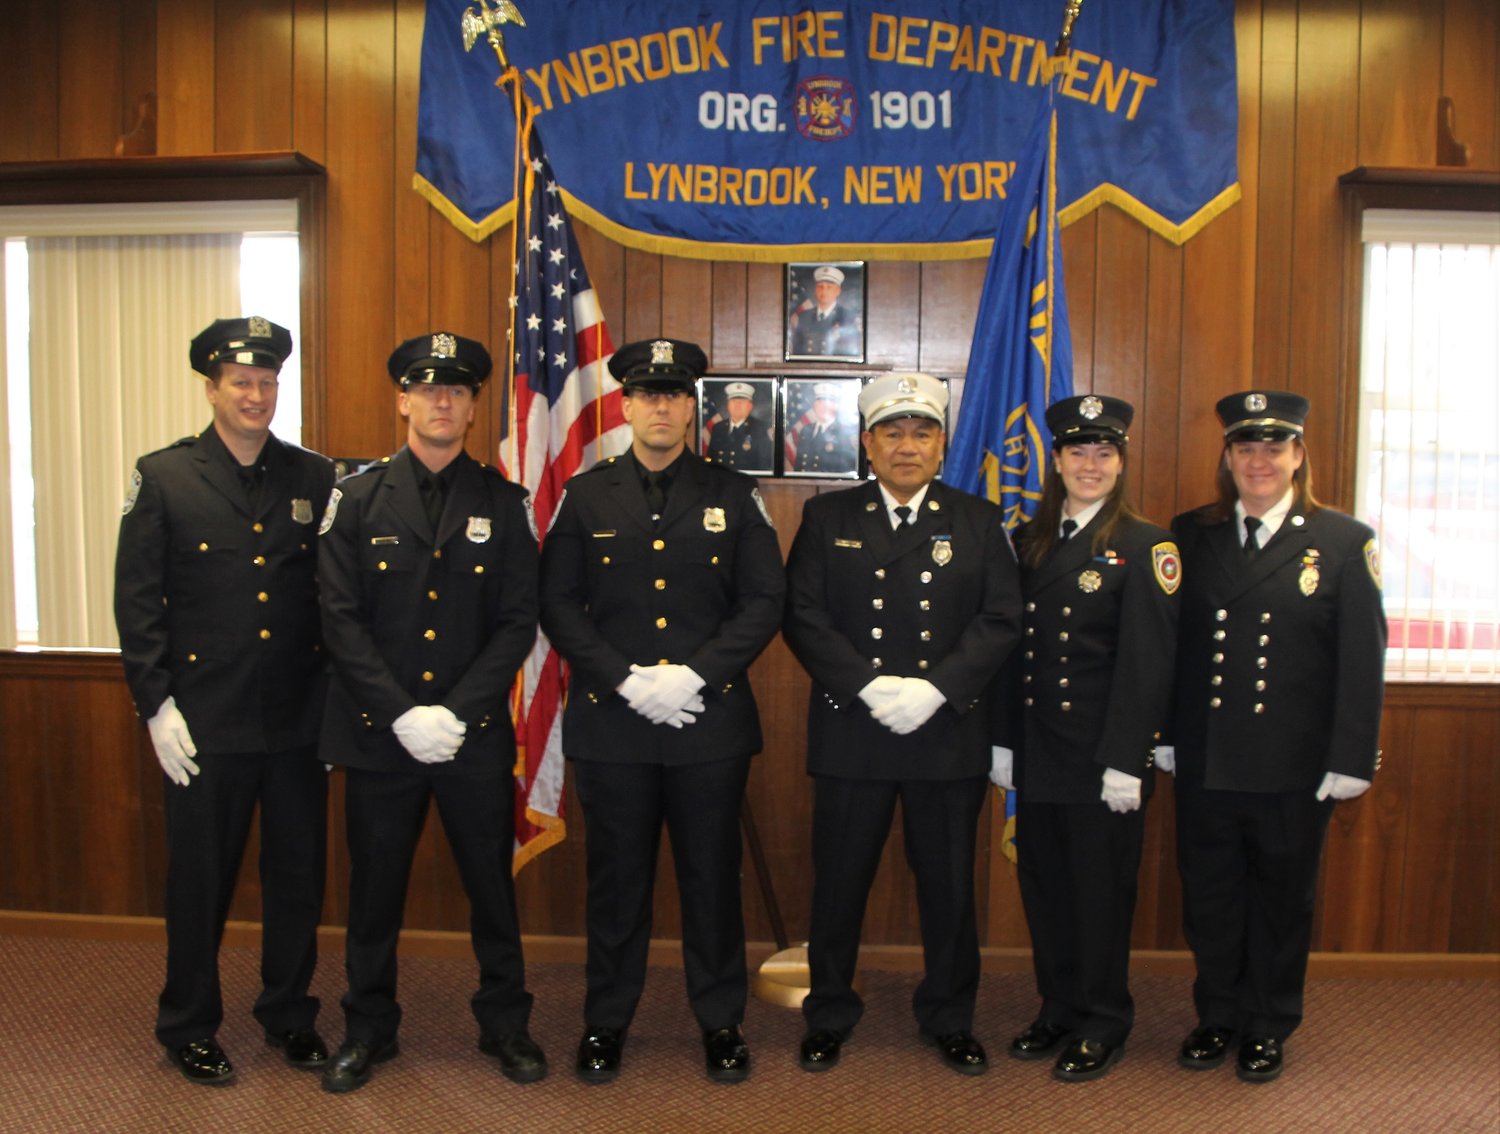 On Jan. 5, Lynbrook Mayor Alan Beach, State Sen. Todd Kaminsky and Assemblywoman Judy Griffin honored six first responders who saved a woman’s life in November. The honorees were, from left, Lynbrook police officers Peter Festa, Jon Stawinski and Derek Buonora; Baldwin Fire Department Captain James Martinez; Lynbrook Fire Department EMT Katie DuBoise; and former LFD Captain Tracey Burke LaBarbara.